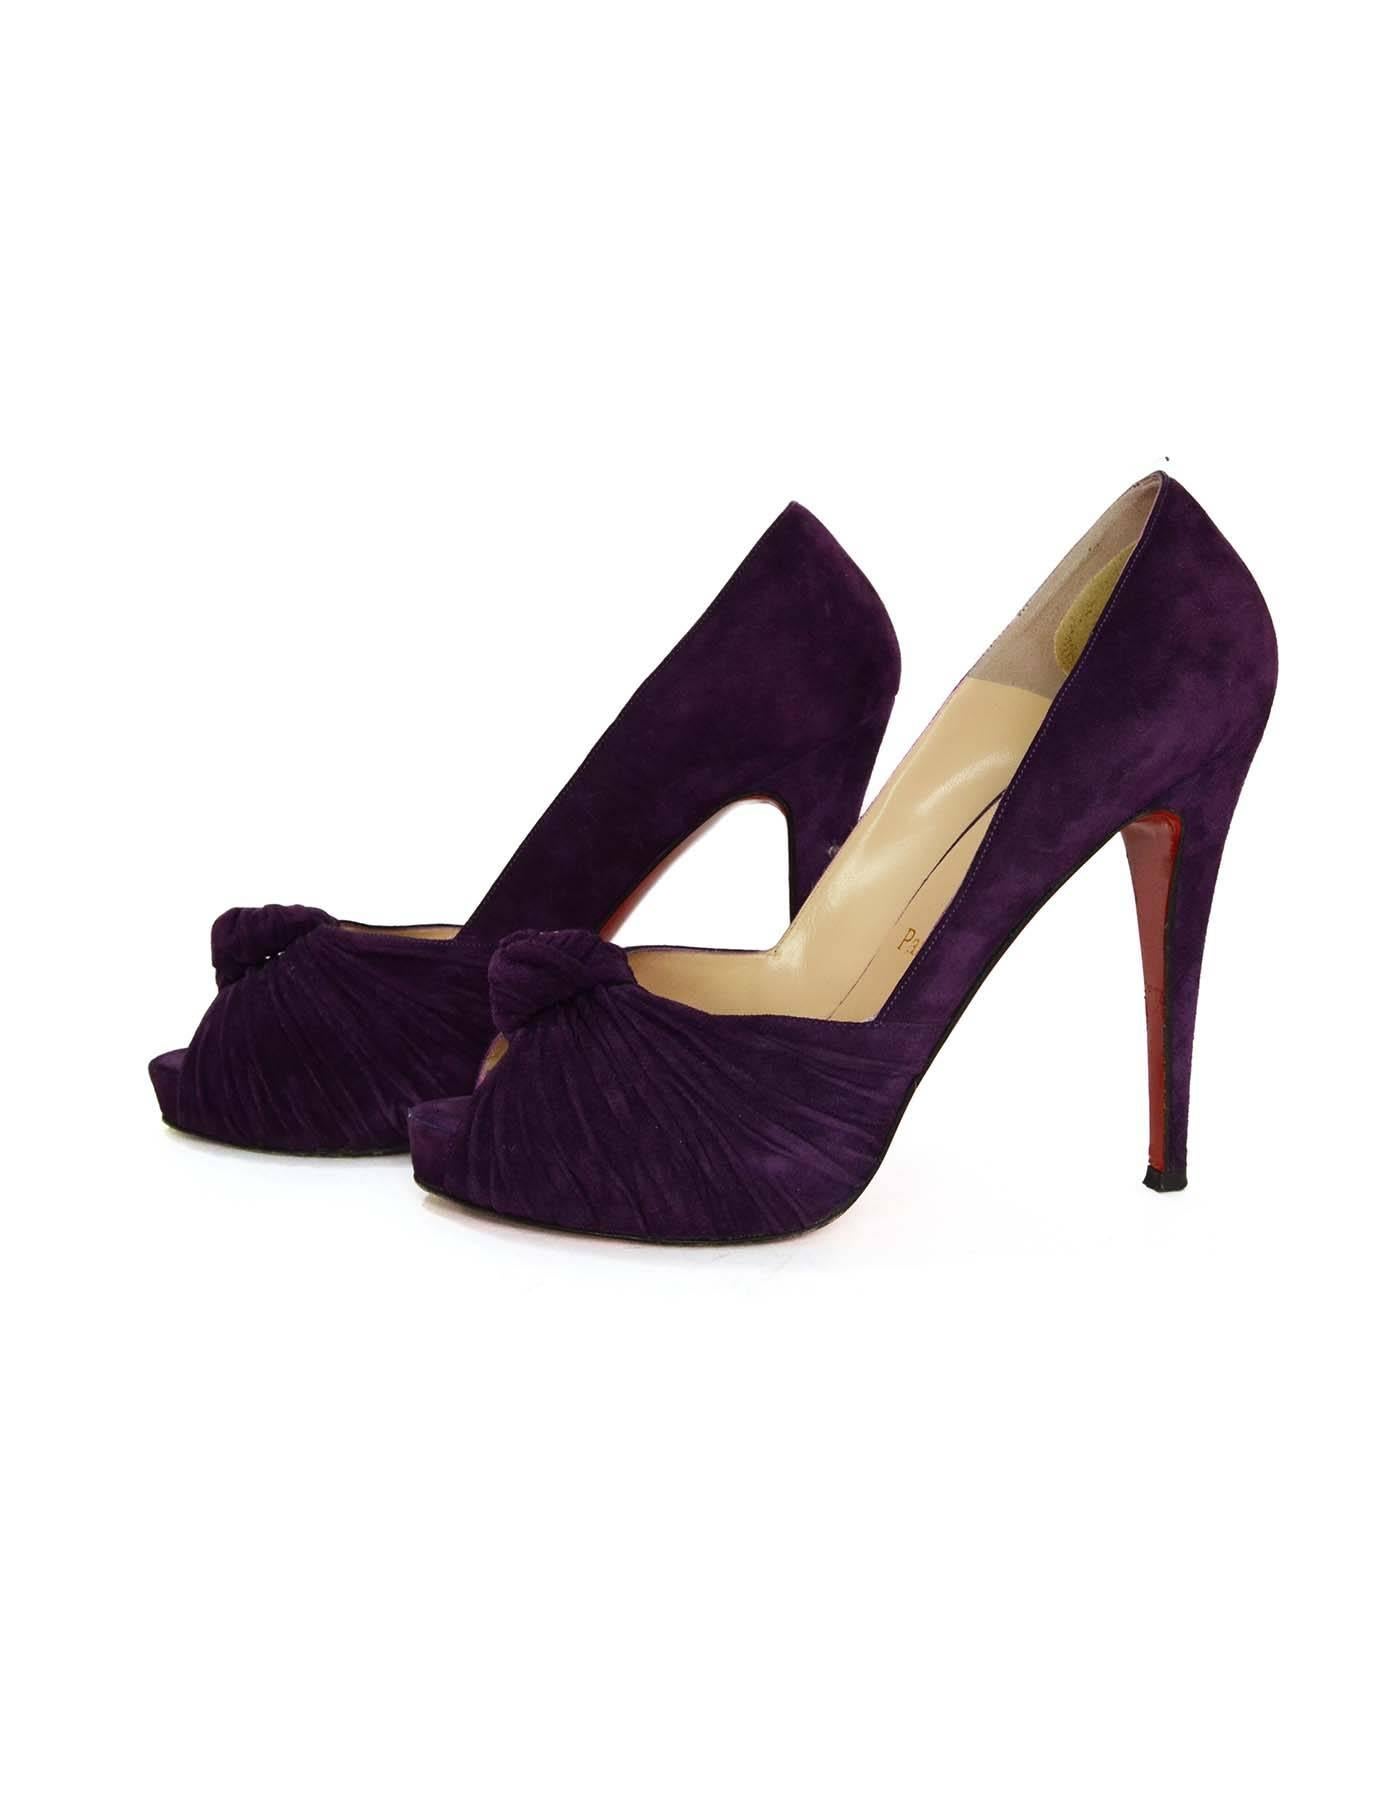 Christian Louboutin Purple Suede Peep-Toe Pumps 
Features a knot and ruched suede at peep-toe
Made In: Italy
Color: Purple
Materials: Suede
Closure/Opening: Slip on
Sole Stamp: Christian Louboutin Vero cuoio Made in Italy 39
Overall